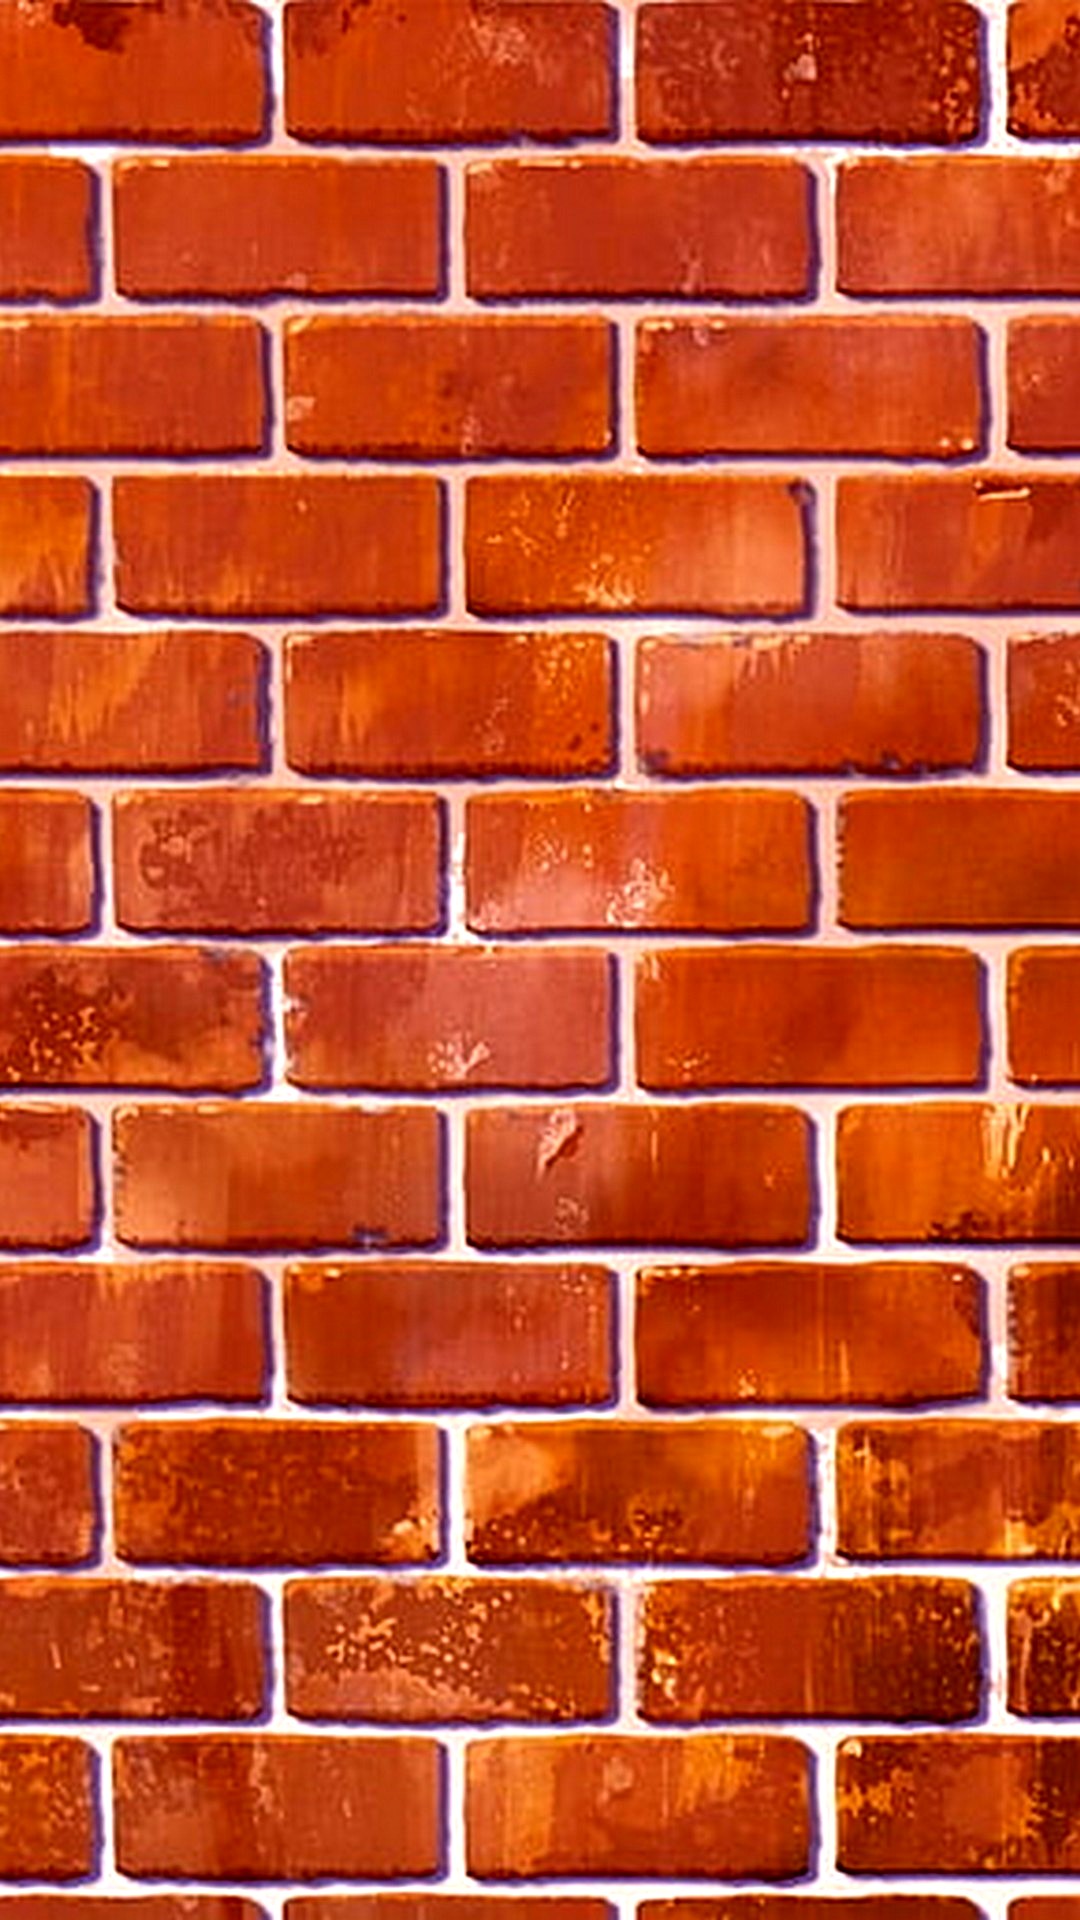 Brick iPhone Wallpaper in HD With high-resolution 1080X1920 pixel. You can set as wallpaper for Apple iPhone X, XS Max, XR, 8, 7, 6, SE, iPad. Enjoy and share your favorite HD wallpapers and background images